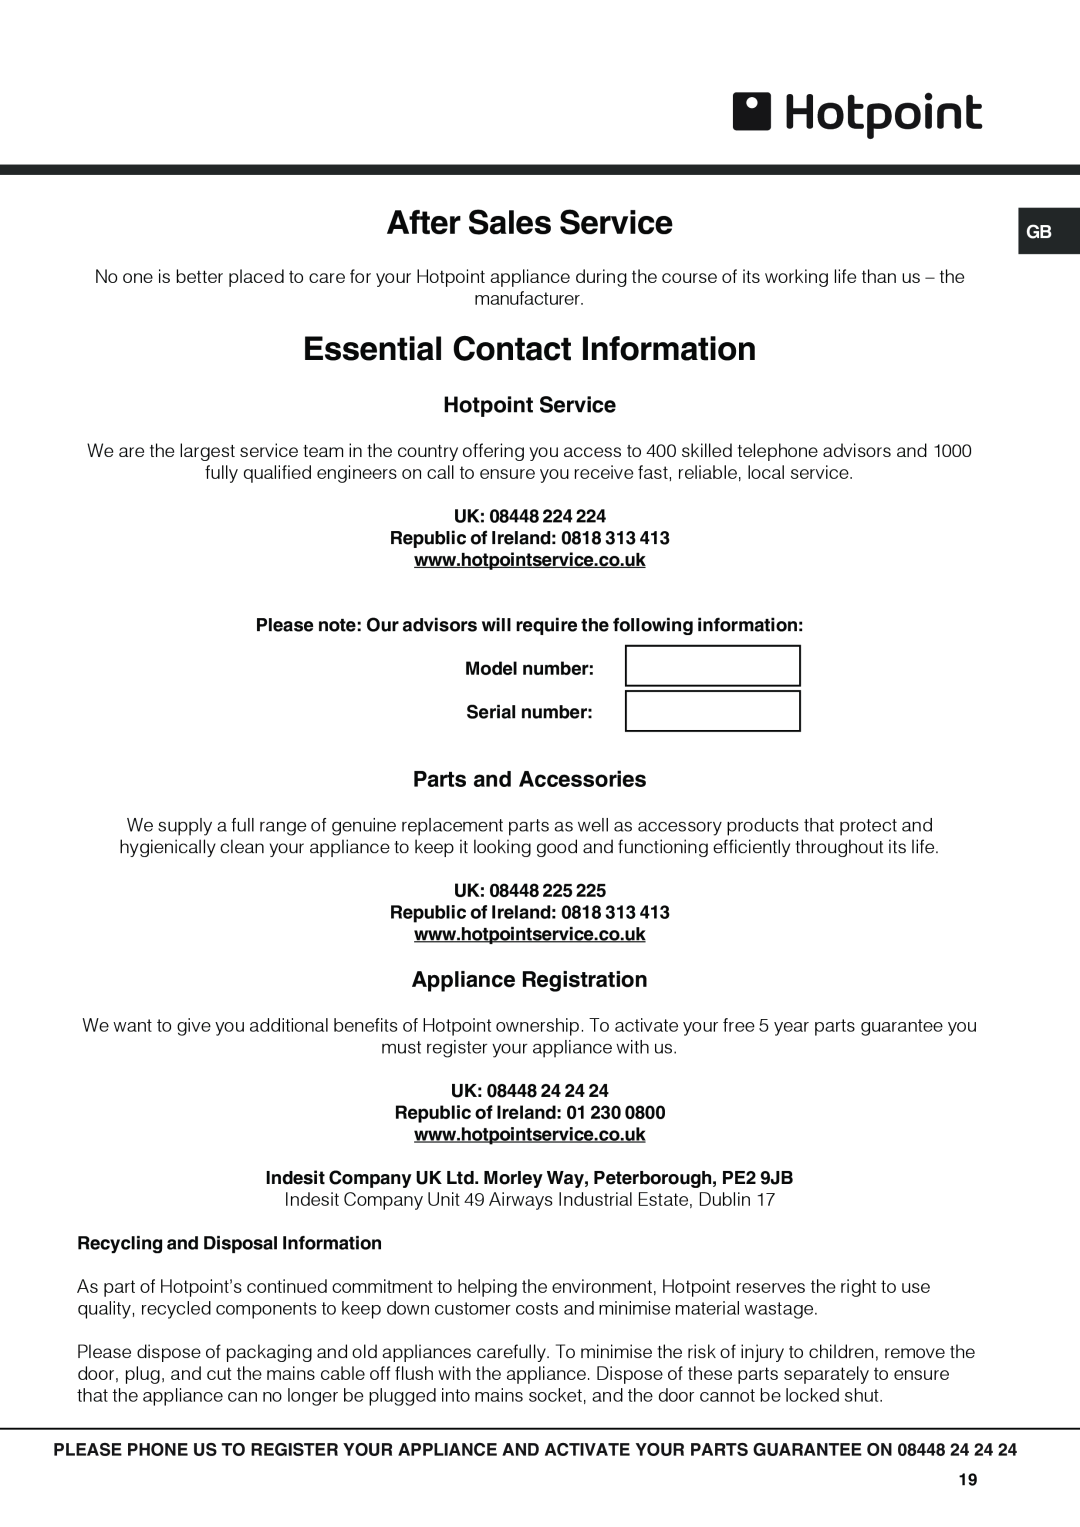 Hotpoint SX 1049Q CX manual Essential Contact Information, Hotpoint Service, Parts and Accessories, Appliance Registration 